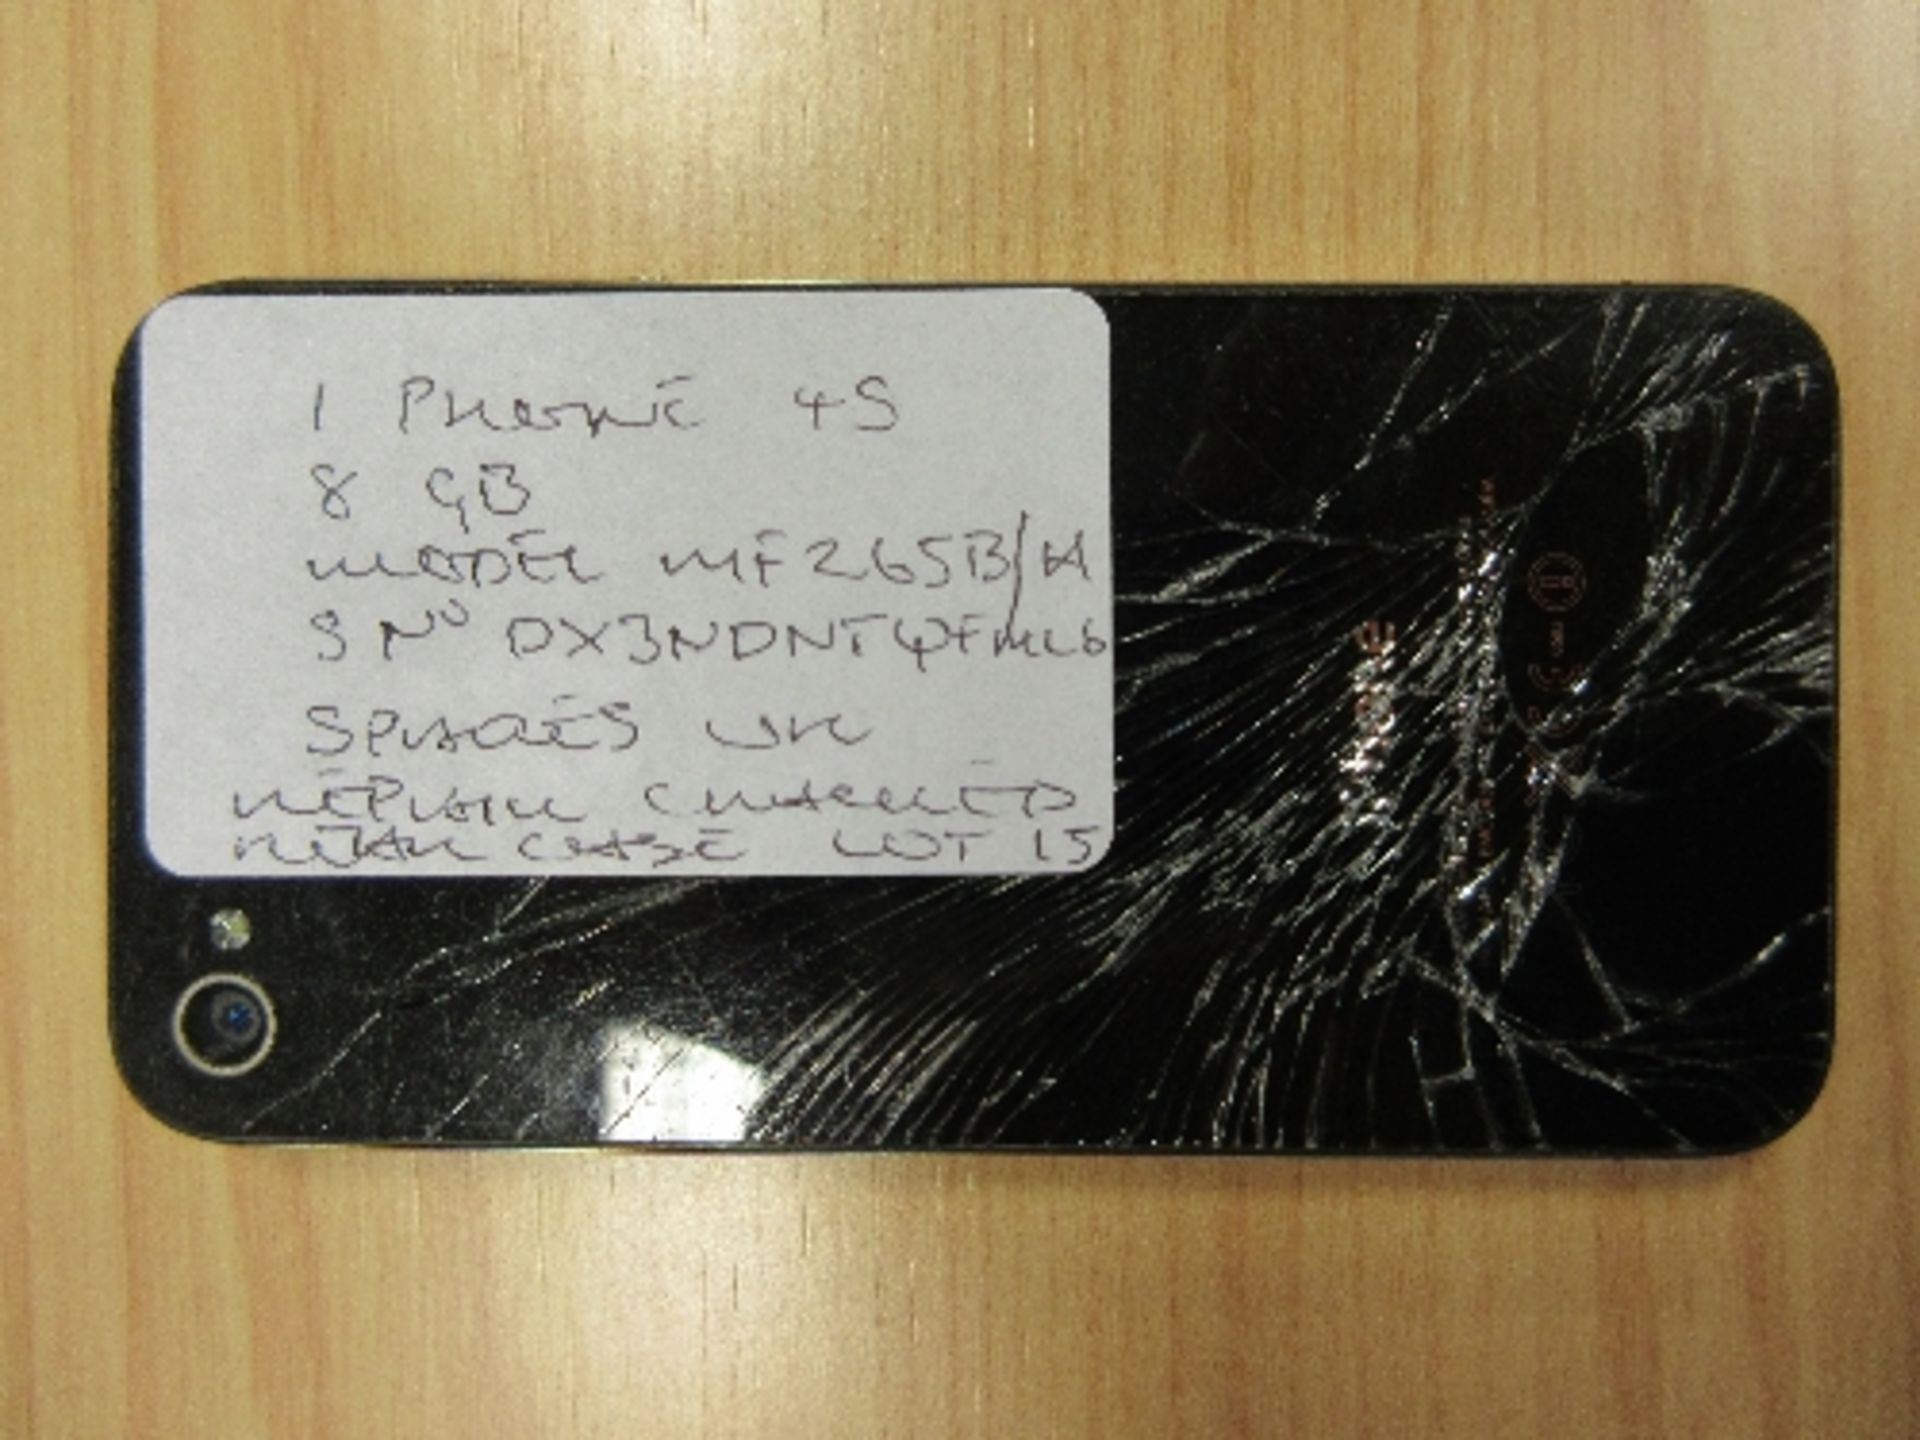 iPhone 4S, 8GB, Serial No. DX3NDNTQFML6, Model MF265B/A, locked to an account, for spares or repair, - Image 2 of 2